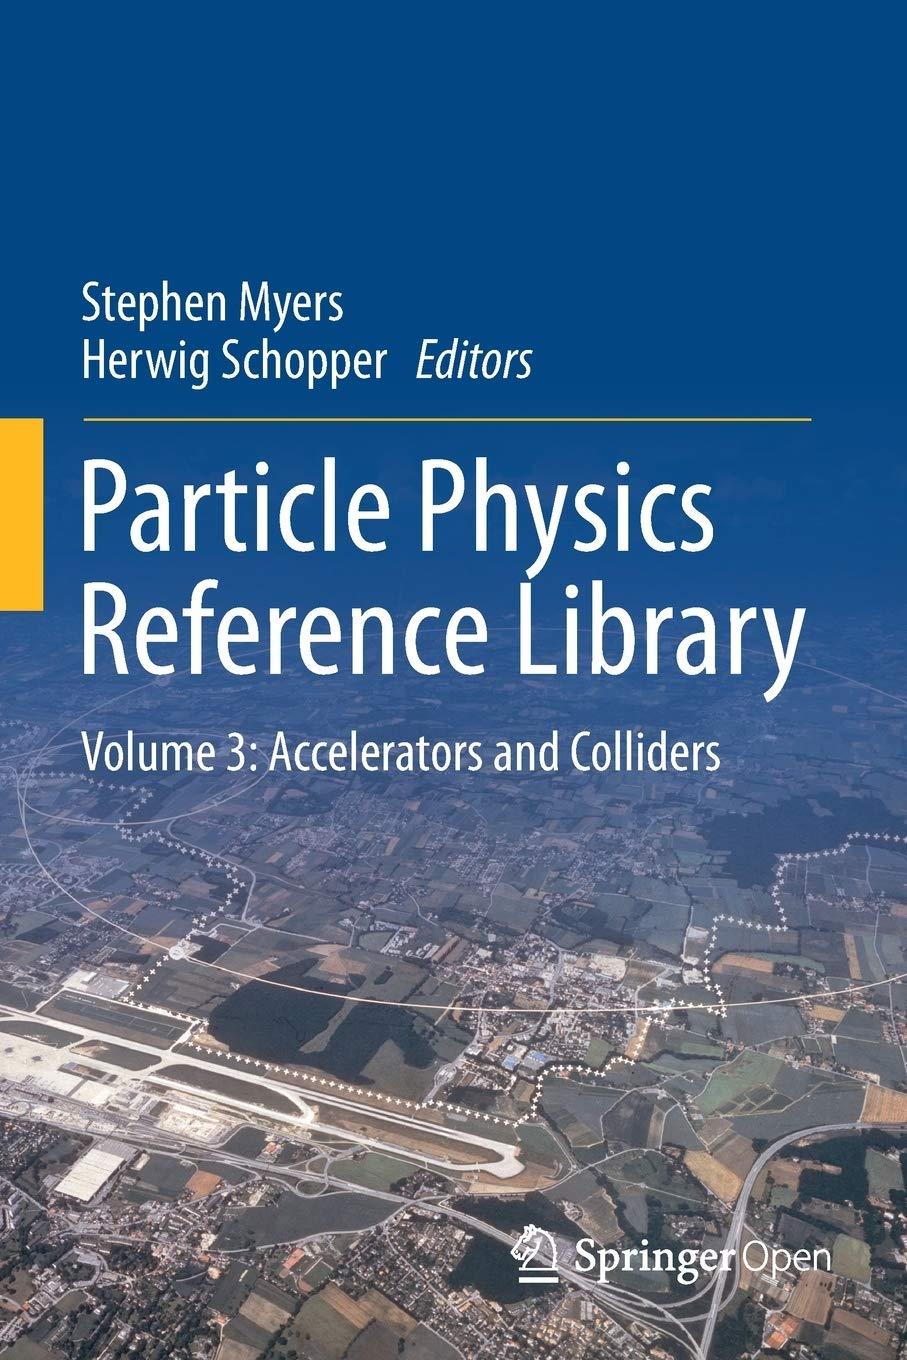 particle physics reference library volume 3 accelerators and colliders 1st edition stephen myers, herwig